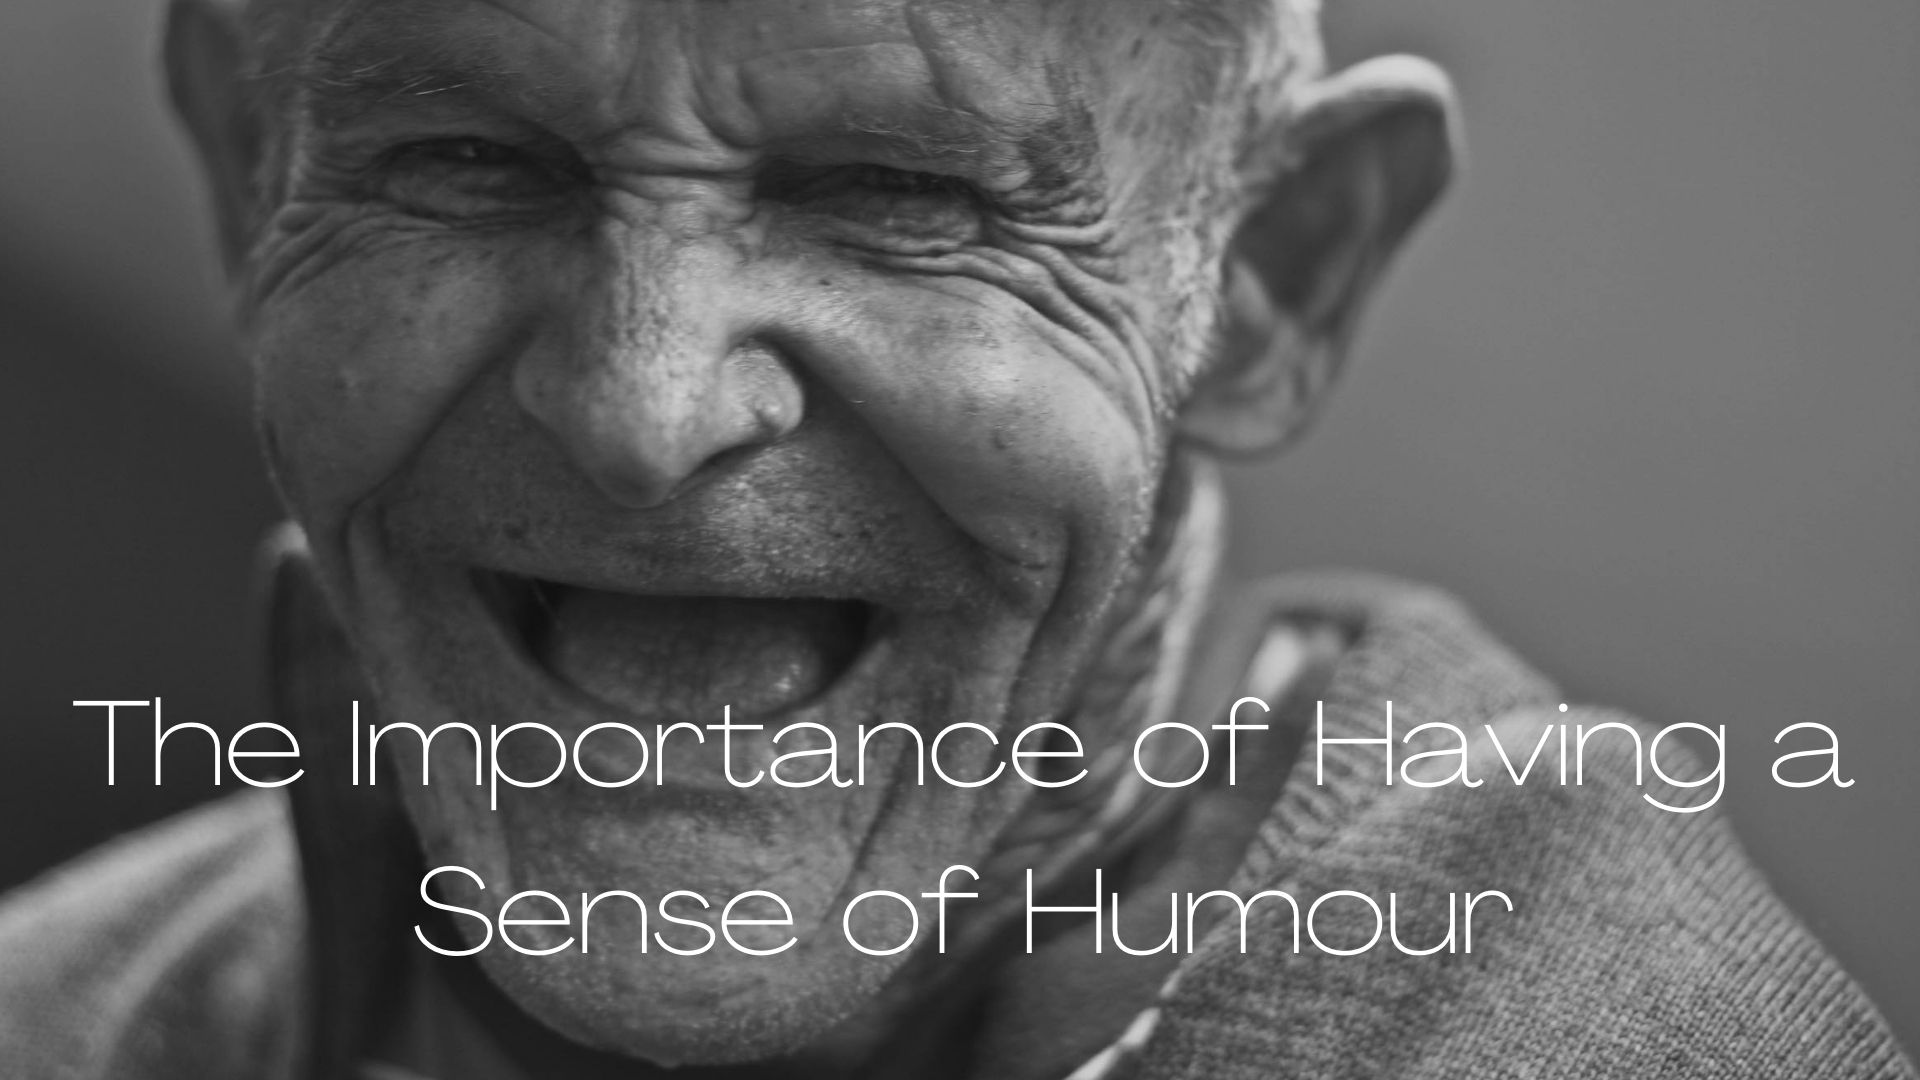 The Importance of Having a Sense of Humour